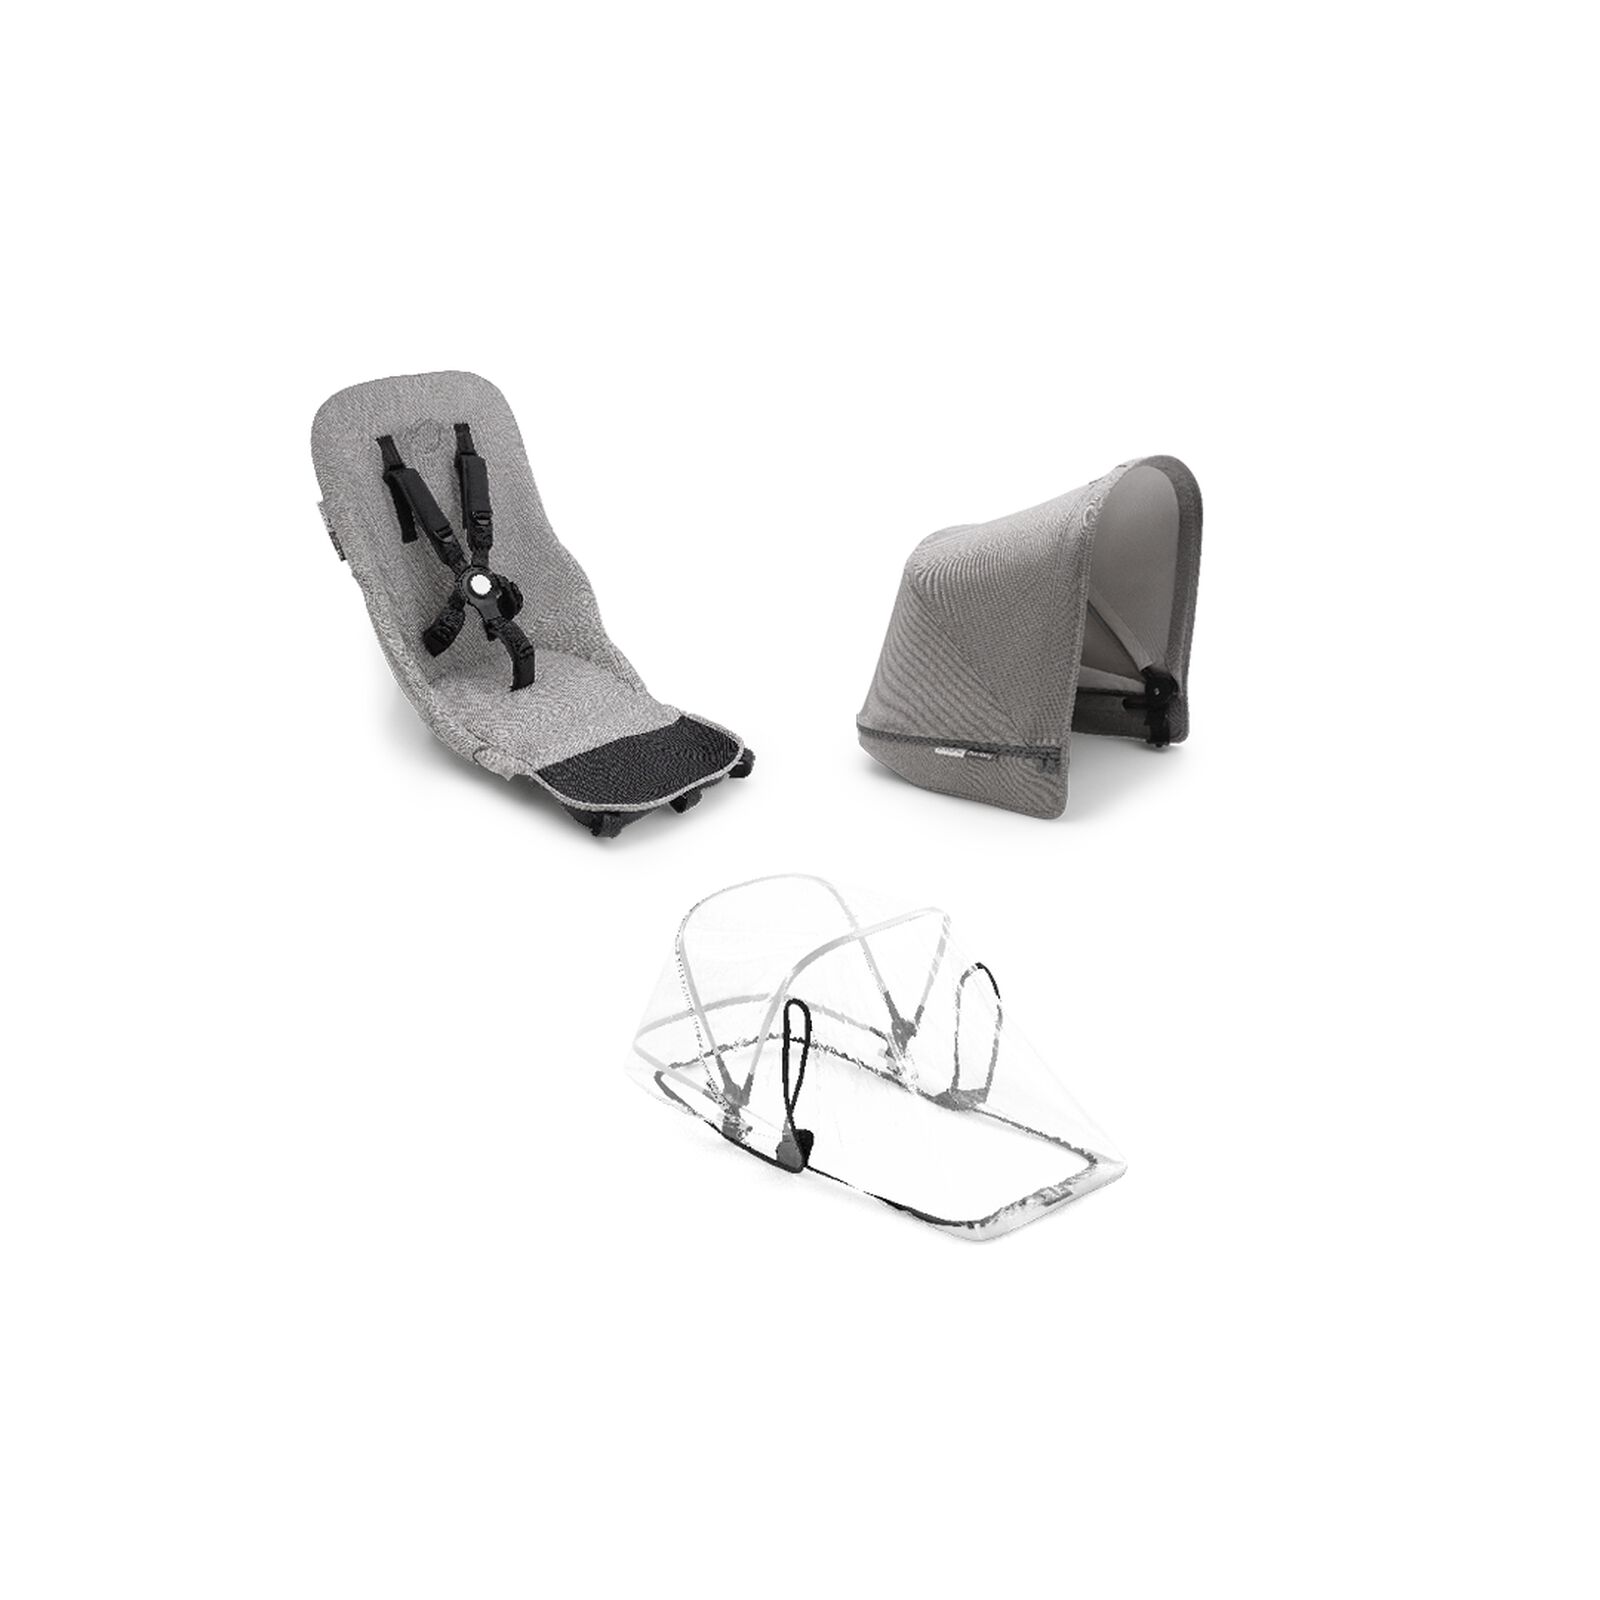 Bugaboo Donkey2 Mineral duo fabric set compl AU LIGHT GREY